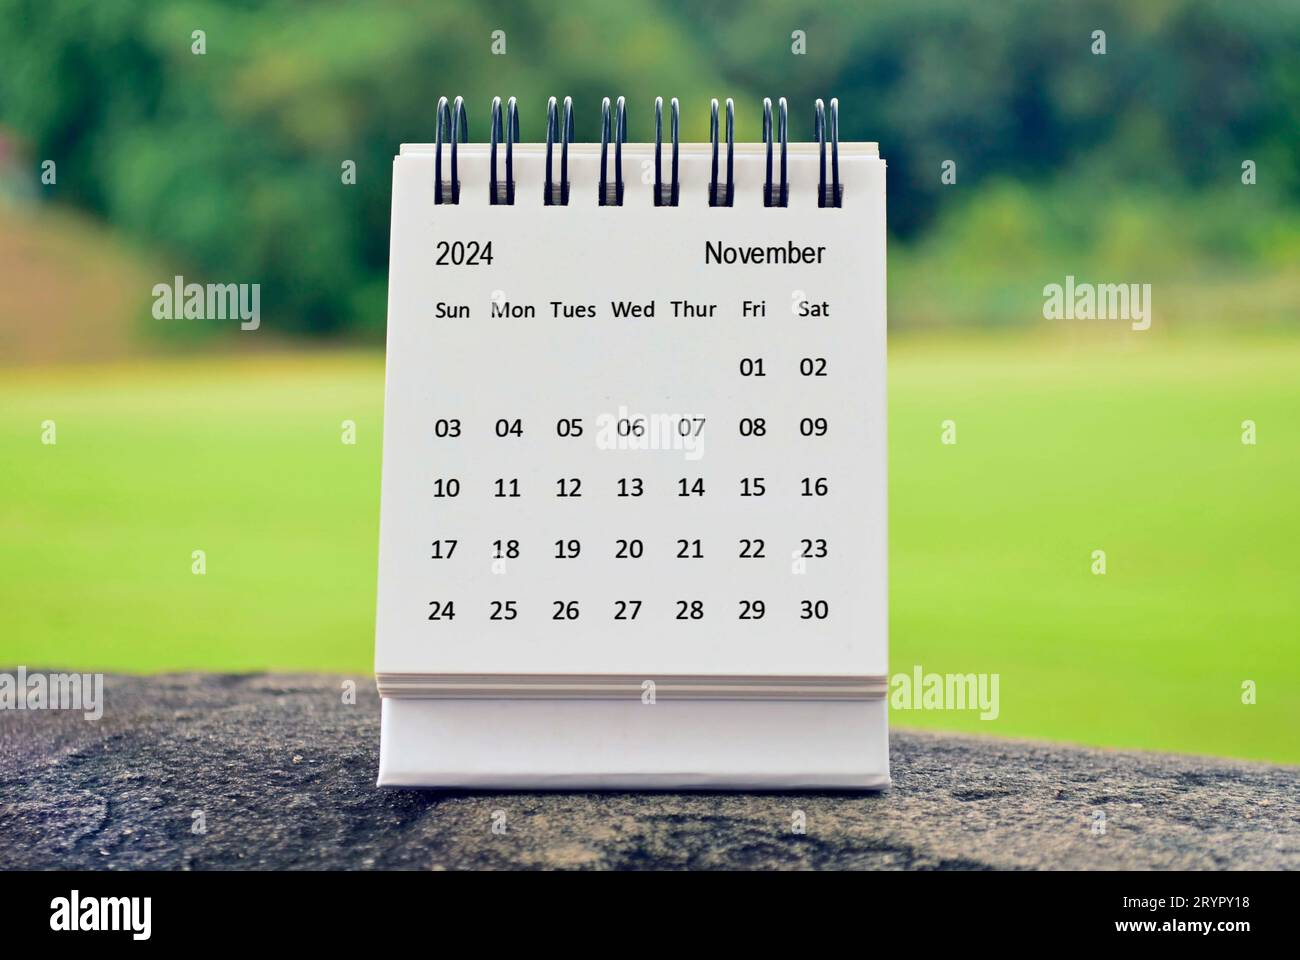 Is 2024 The Next Leap Year Printable Calendar 2024